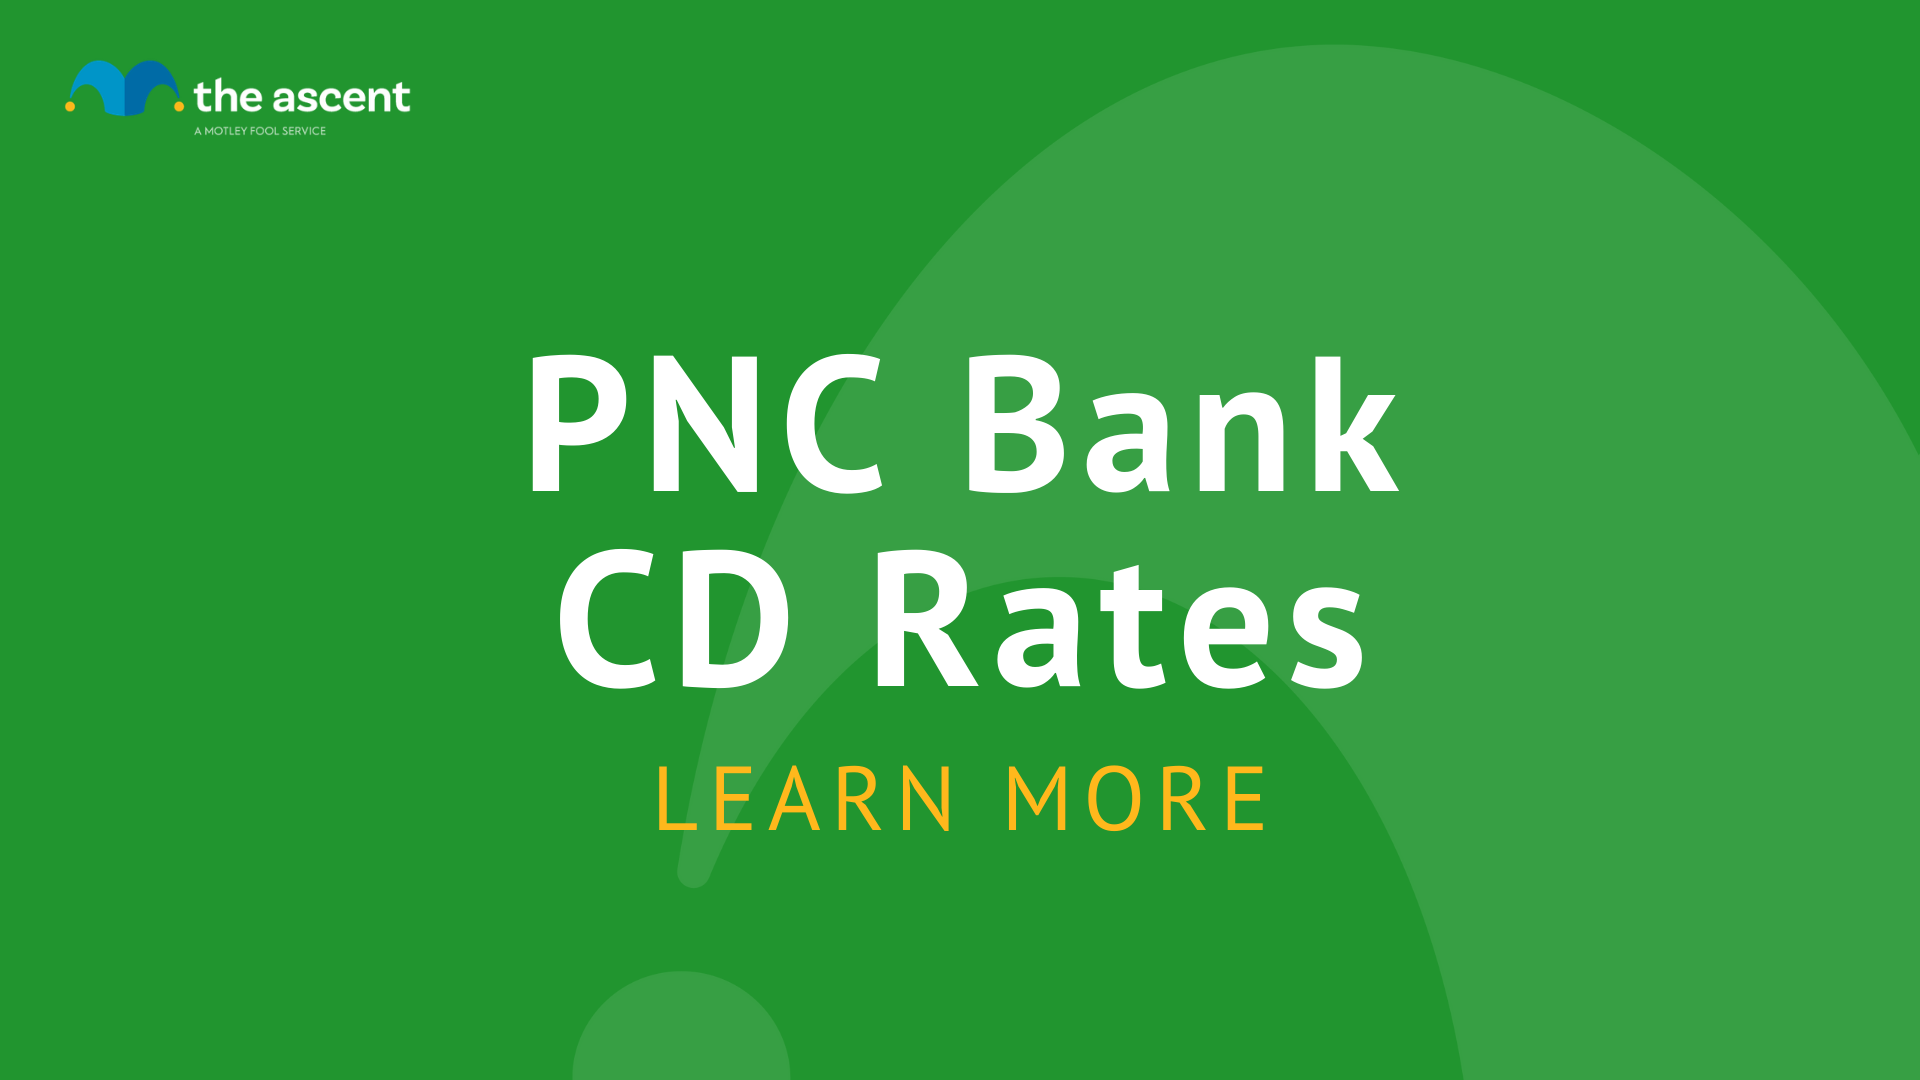 PNC Bank CD Rates for February 2023